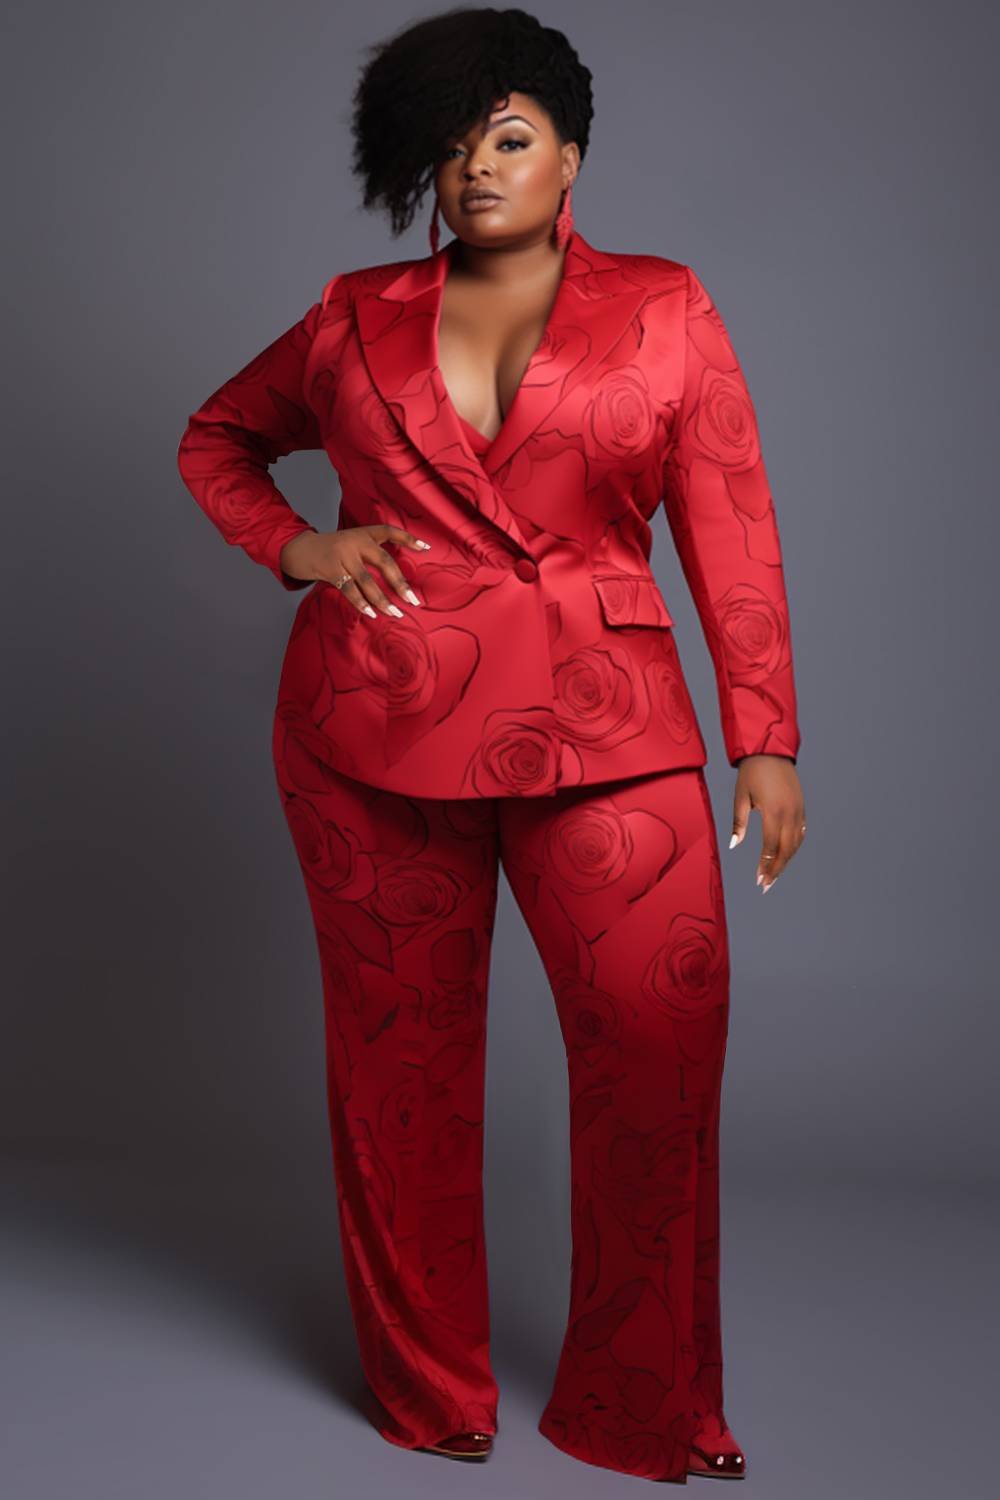 Xpluswear Design Plus Size Daily Pant Suits Casual Red Floral Spring Summer Turndown Collar Long Sleeve Satin Two Piece Suit Pant Sets